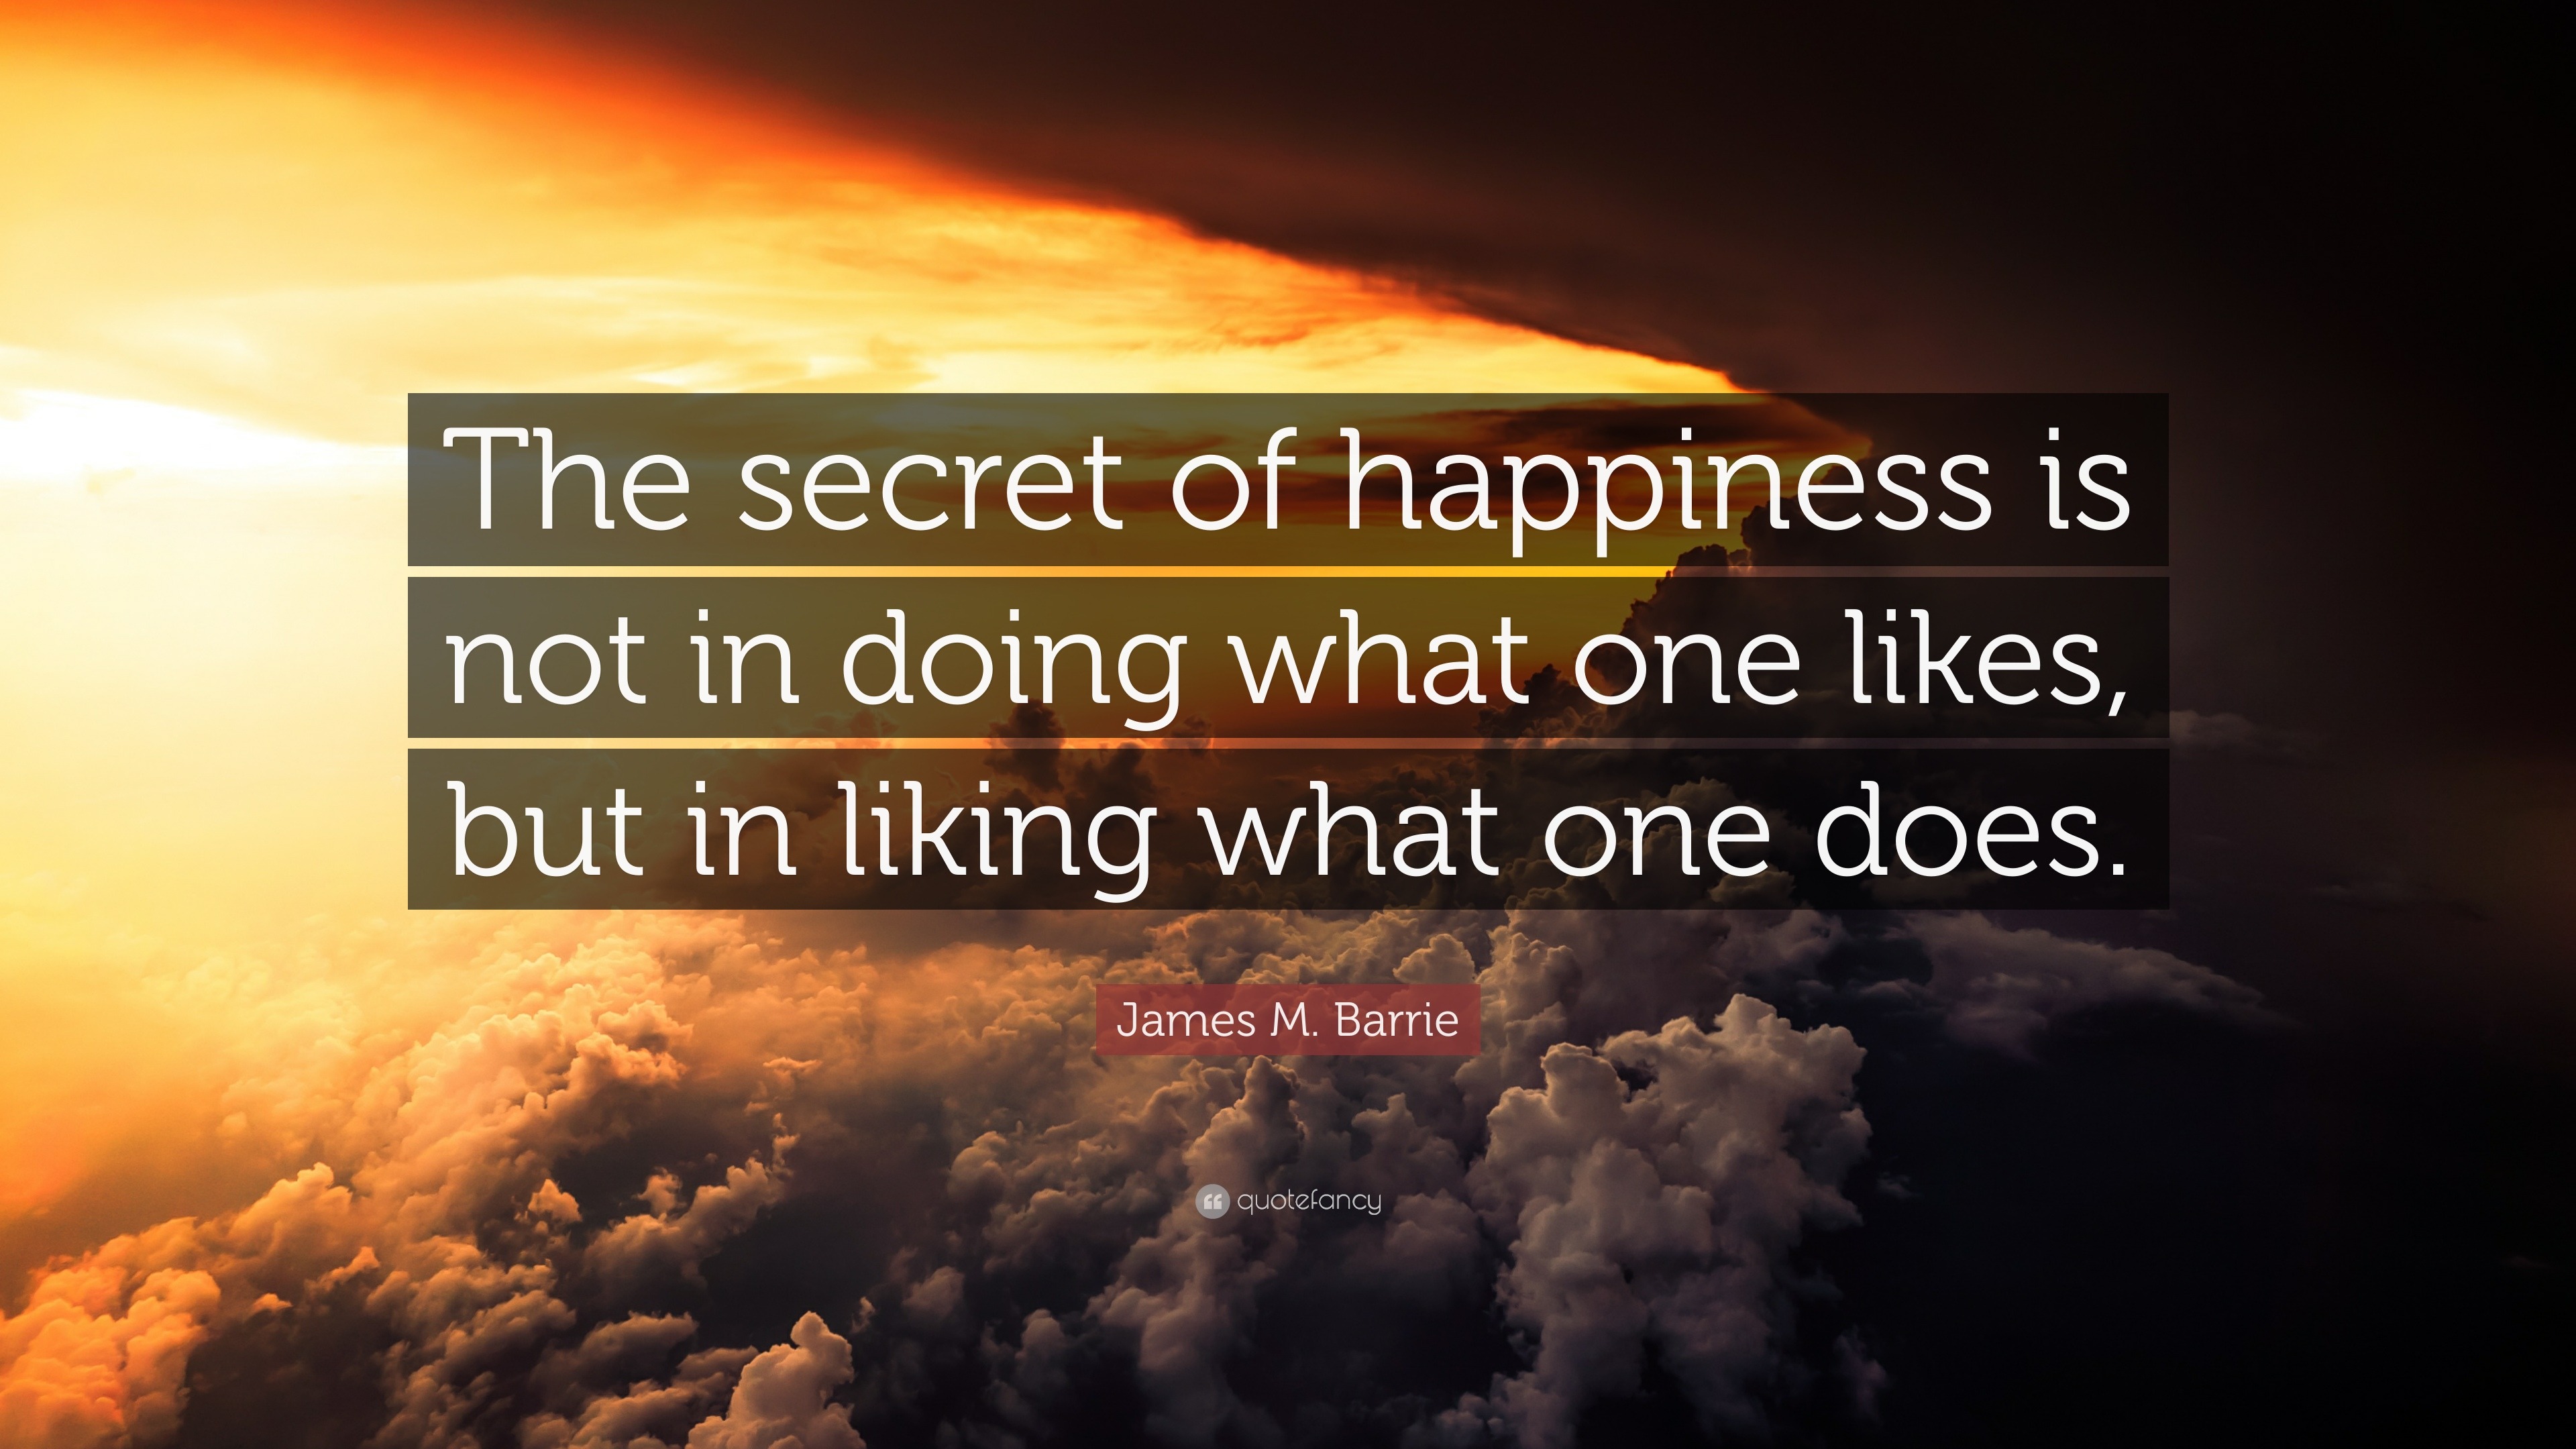 James M. Barrie Quote: “The secret of happiness is not in doing what